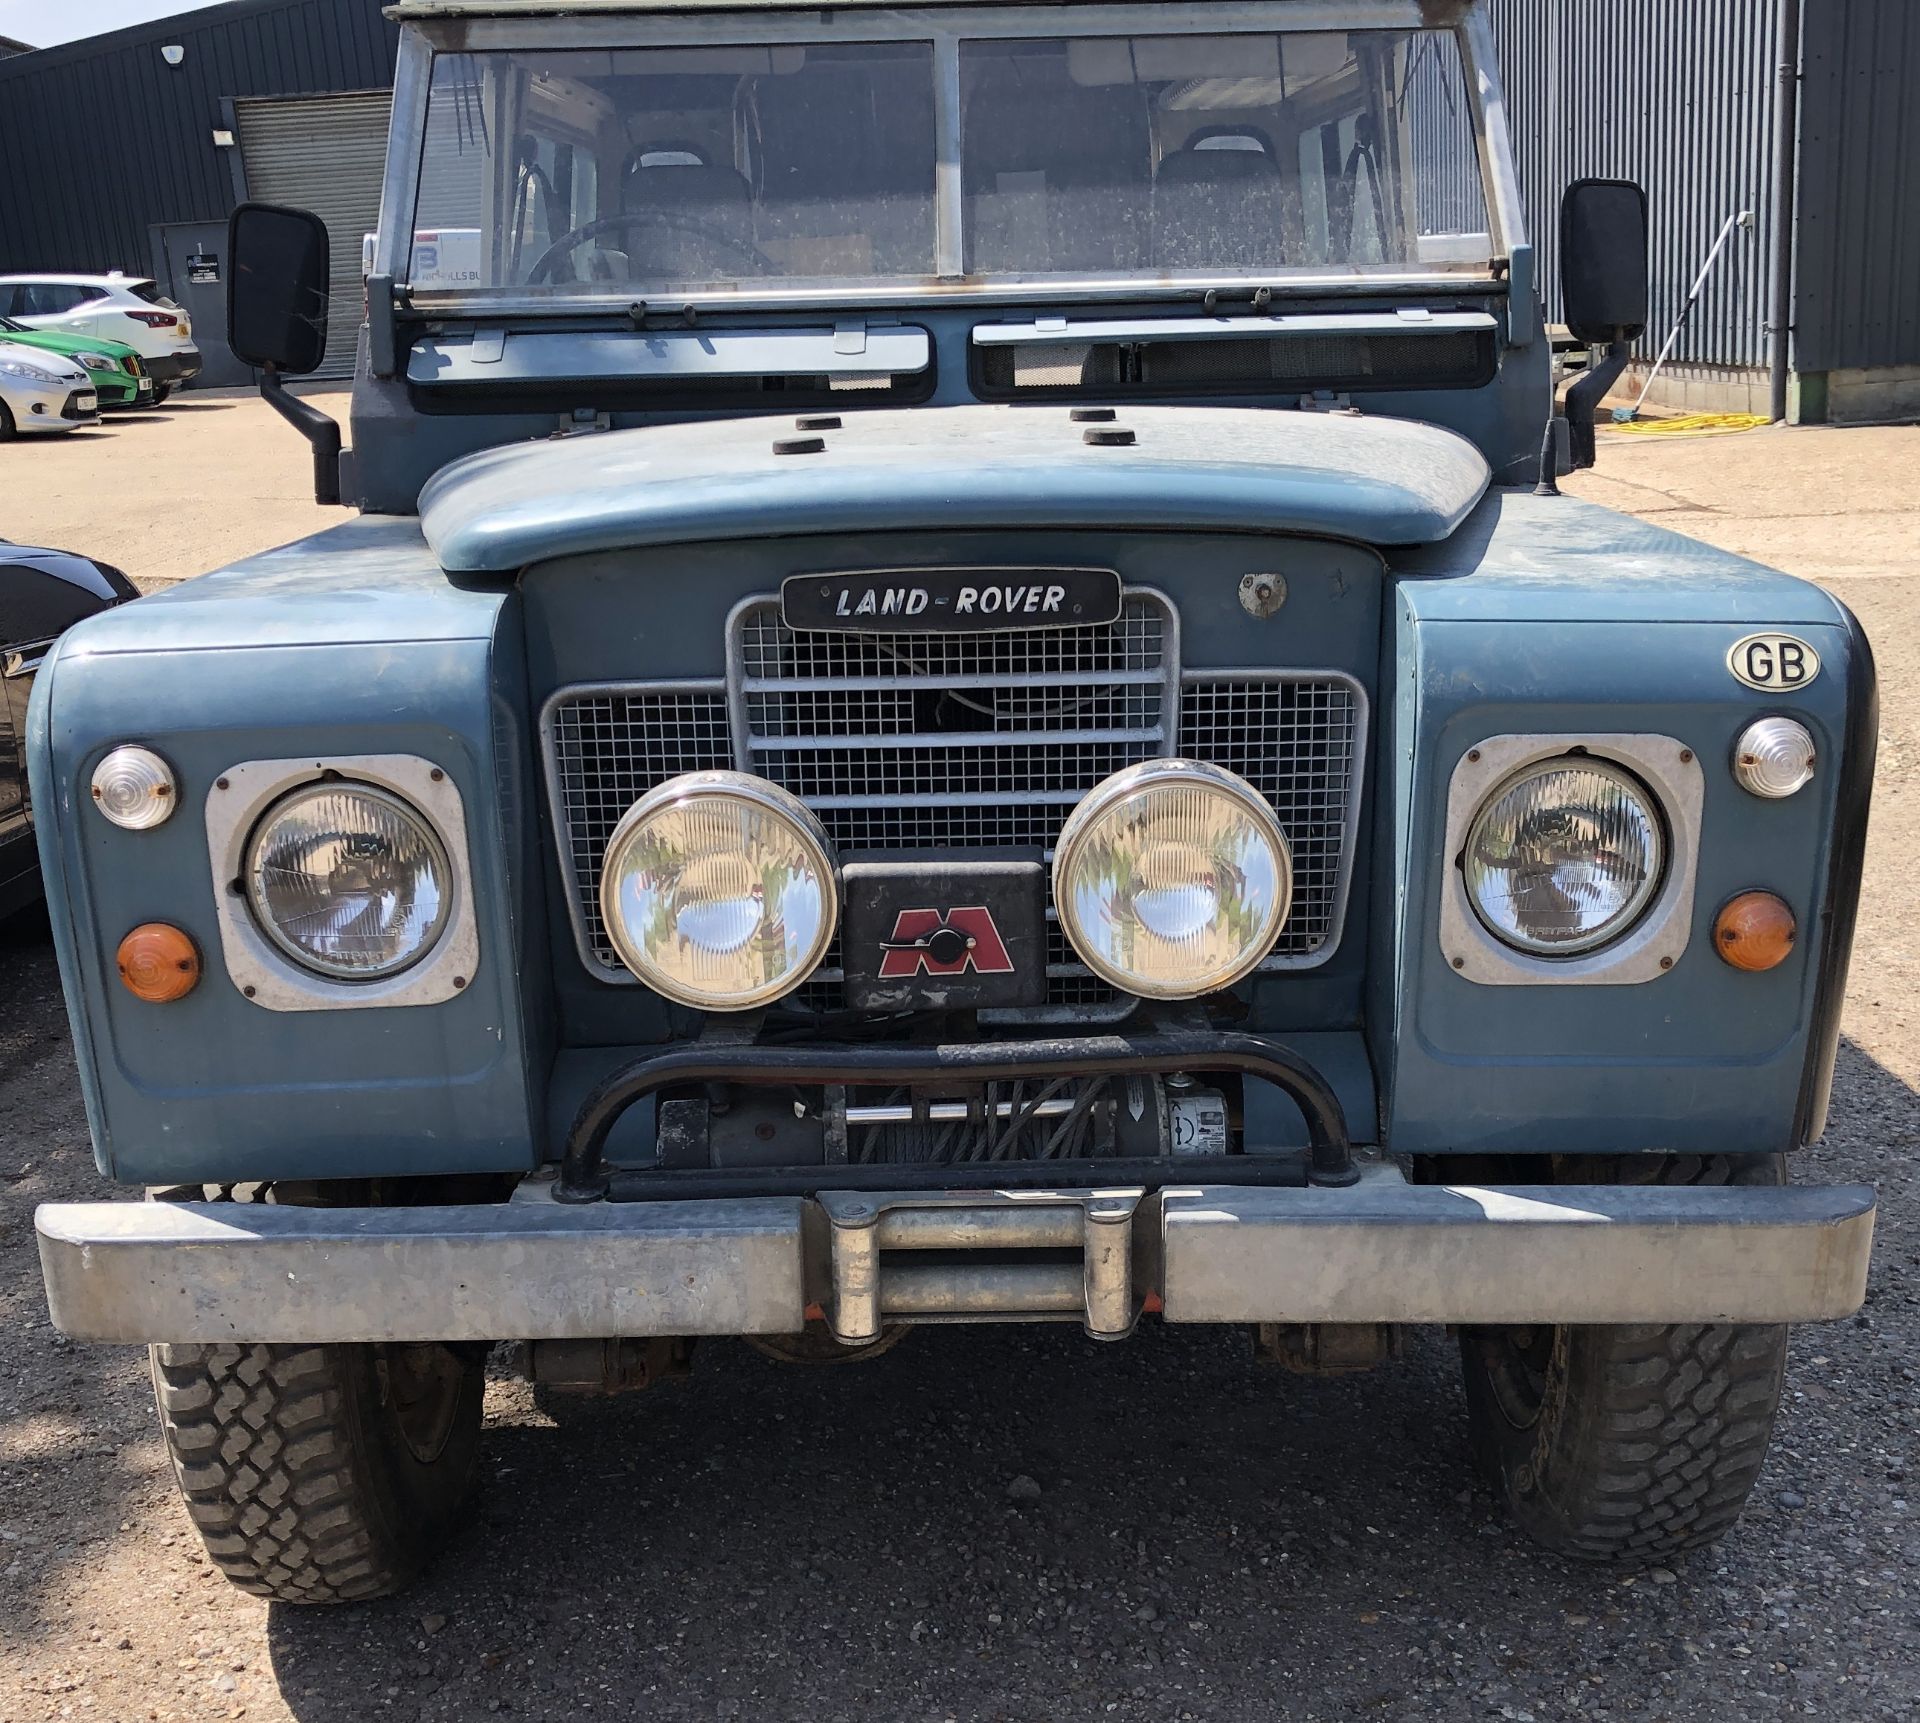 Land Rover 88, Series 3 - Registration YCW 737Y, First Registered 3rd March 1983; Removal Hard - Image 24 of 37